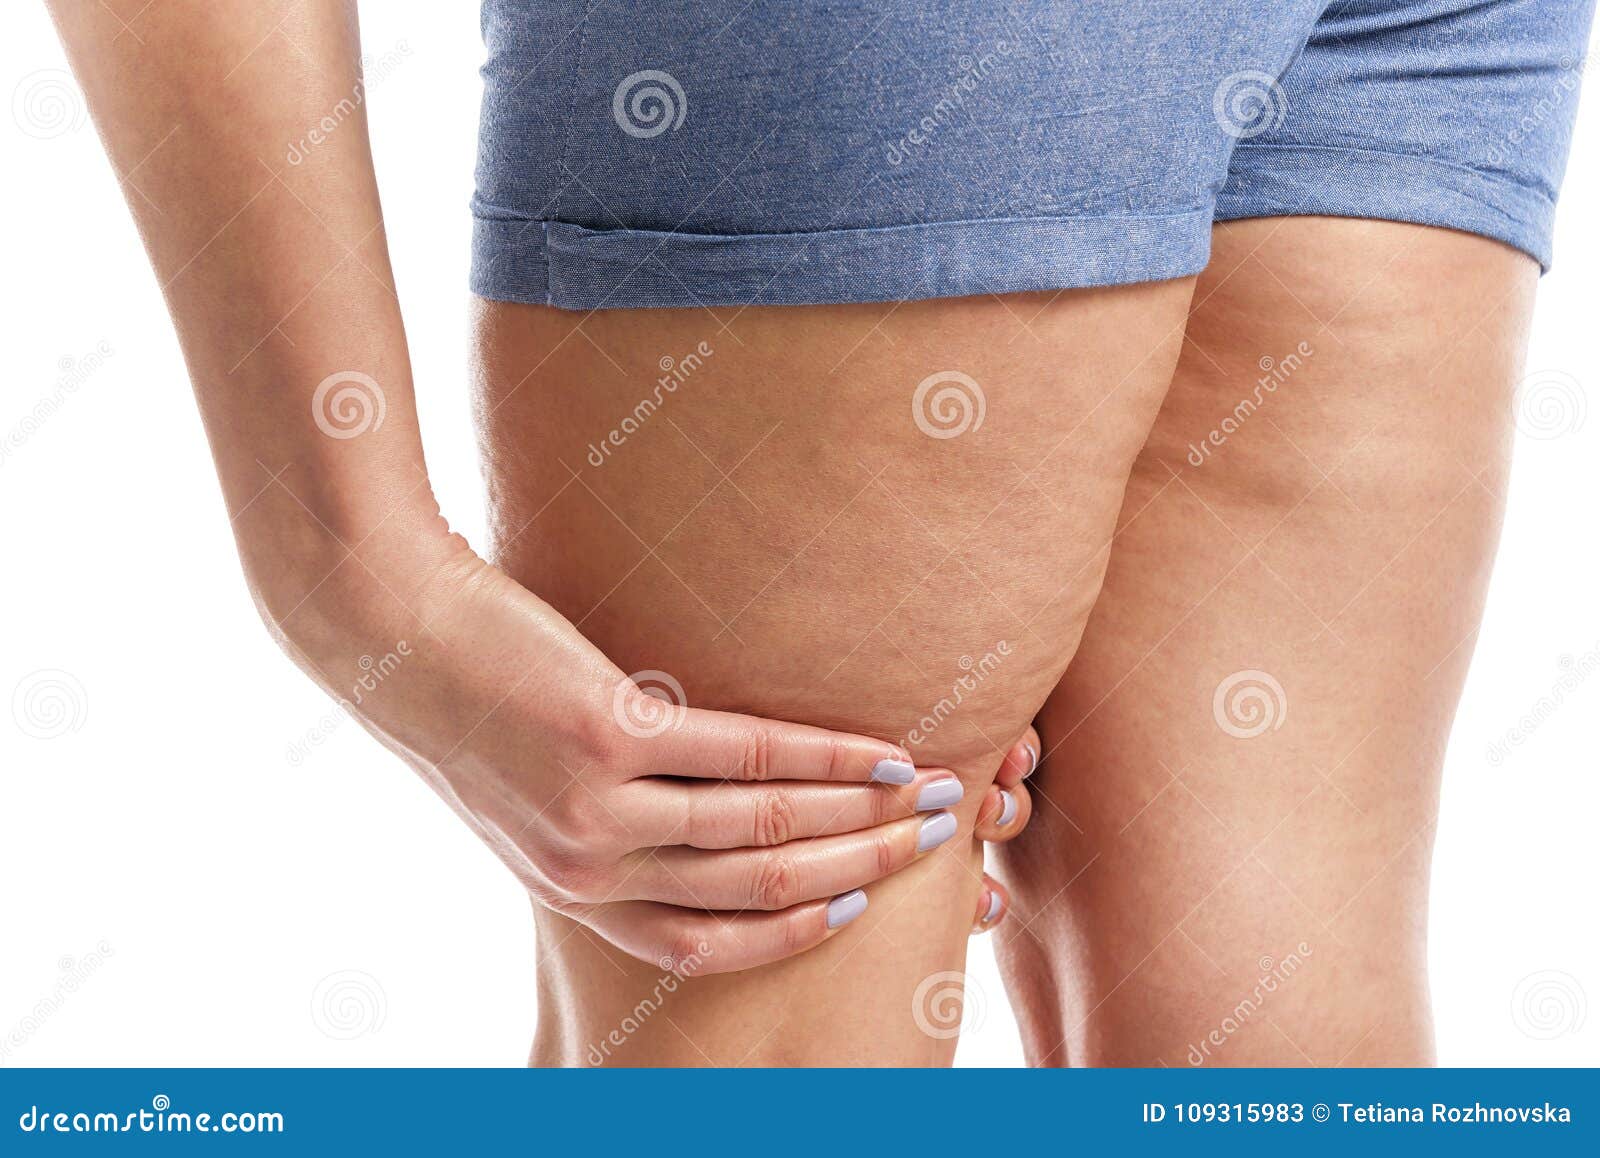 Fat And Cellulite On The Legs Stock Image Image Of Conscience